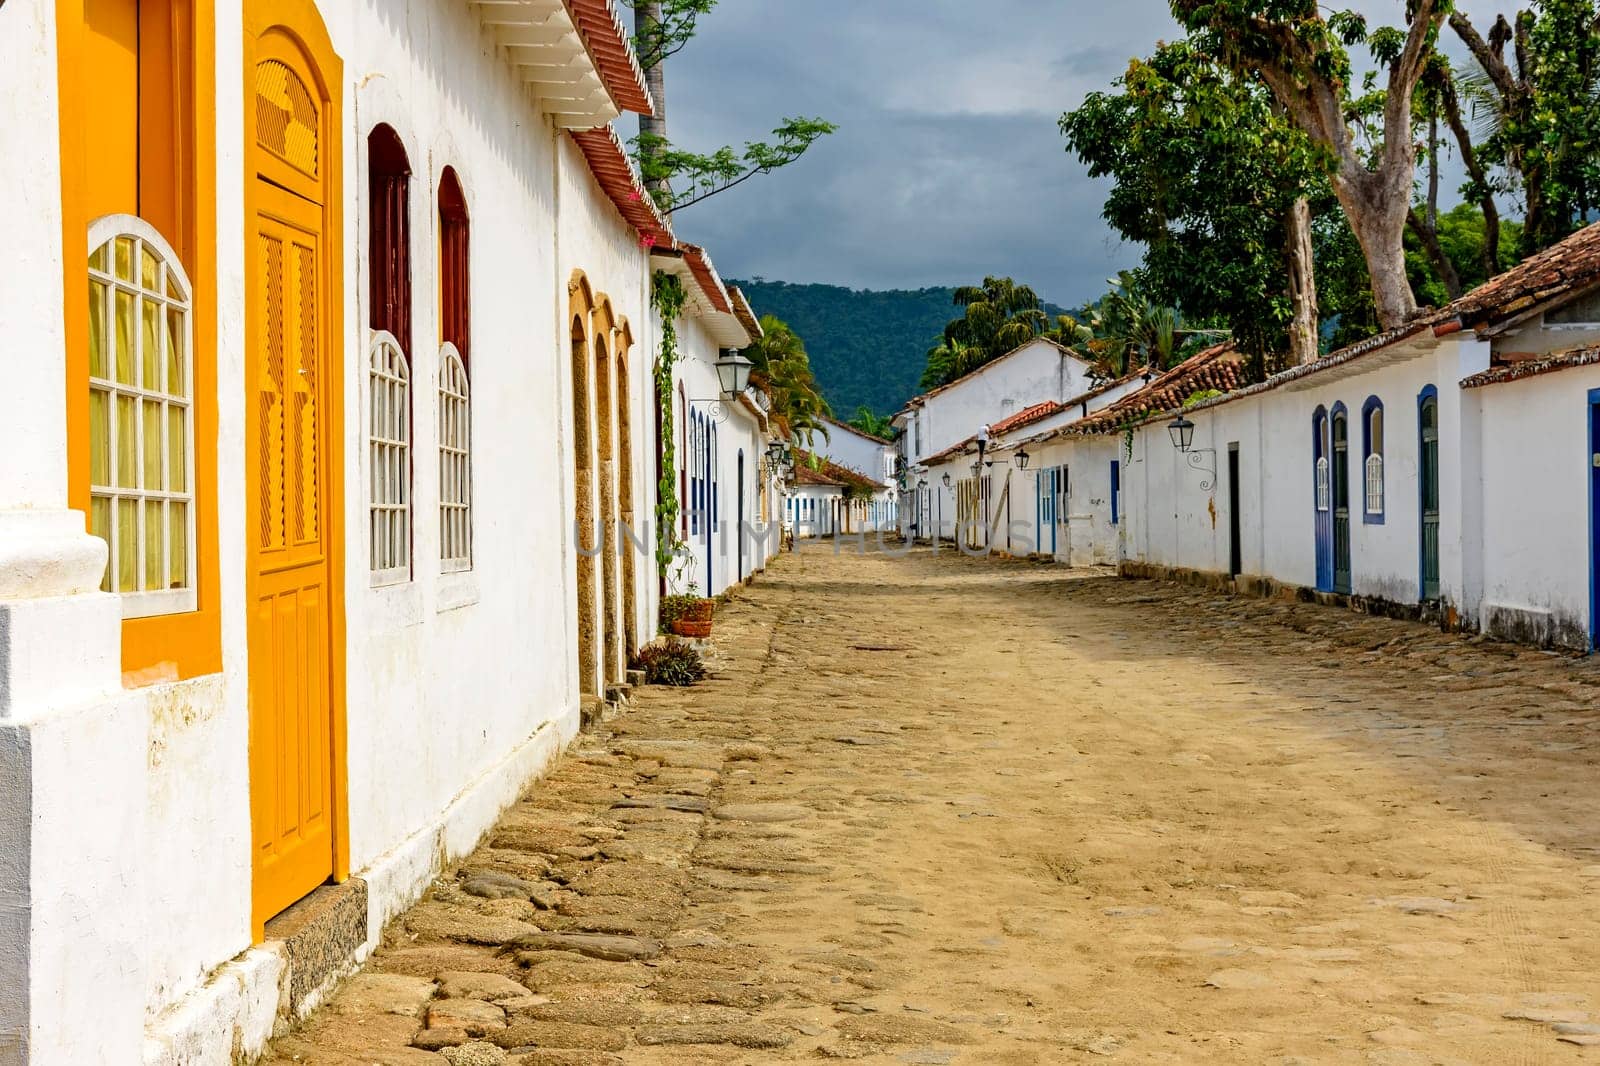 Streets of cobblestone and old houses in colonial style by Fred_Pinheiro